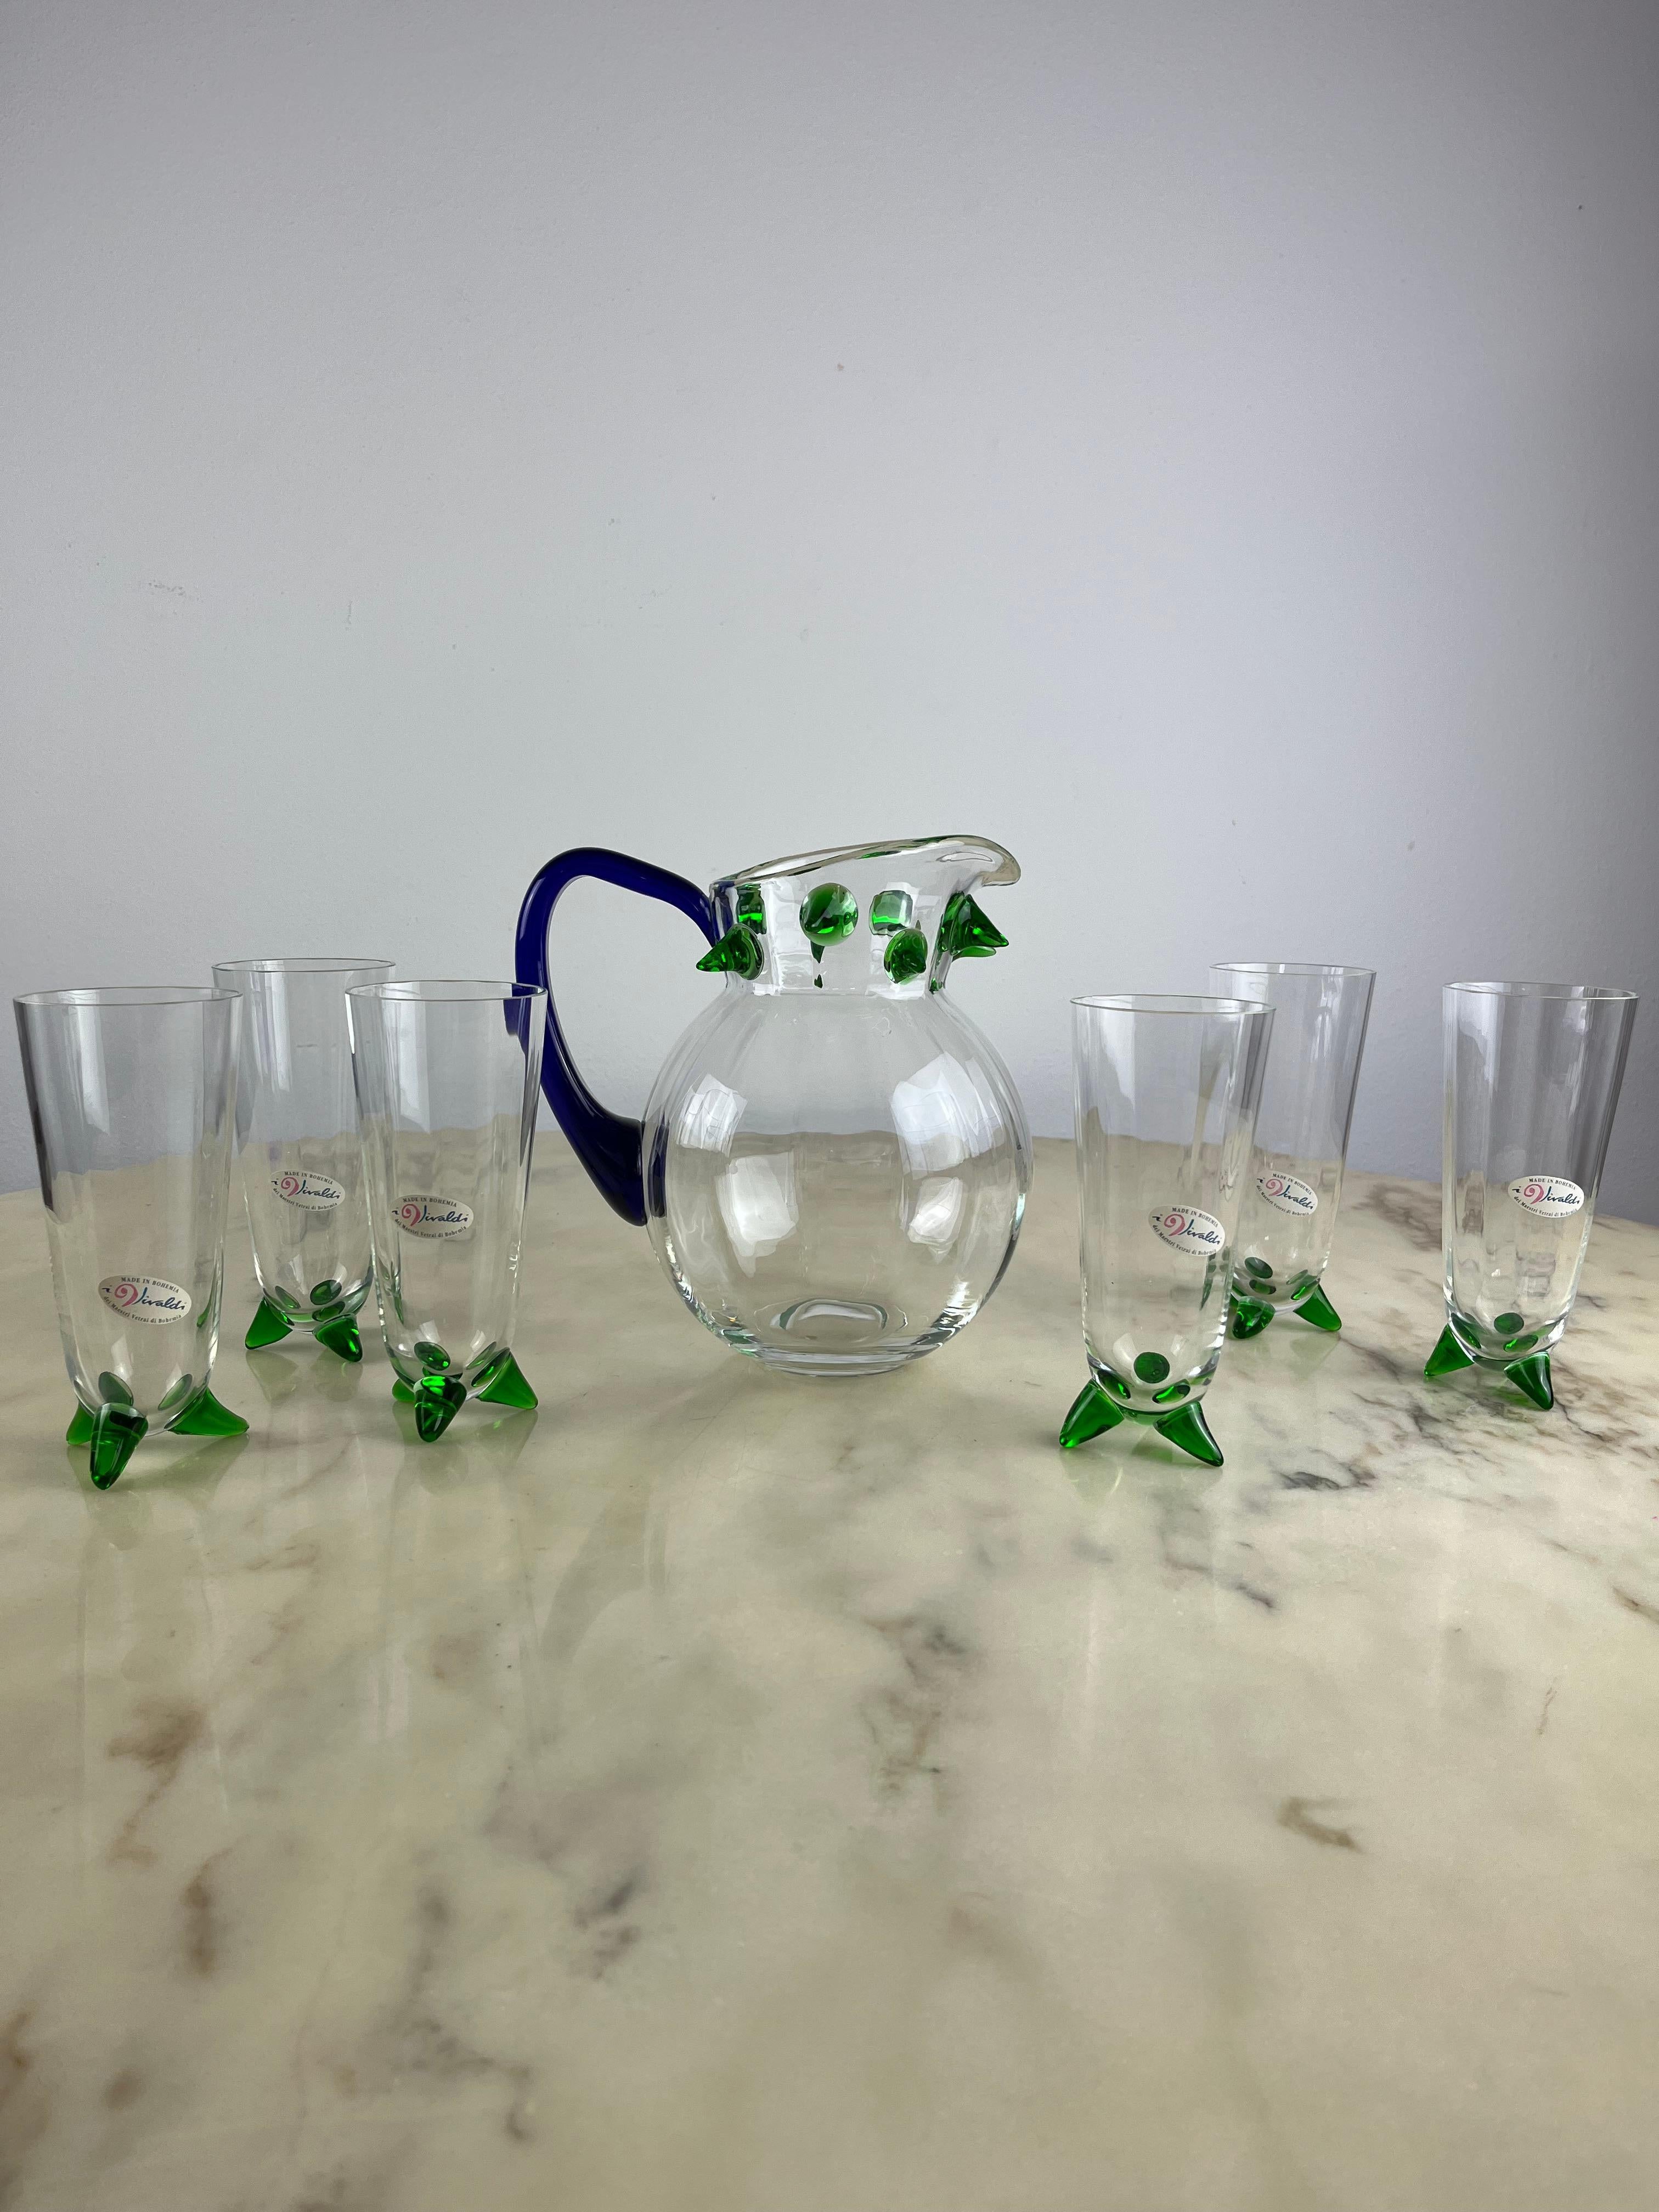 Bohemia crystal cocktail set for 6, 1988.
Intact, purchased and never used.